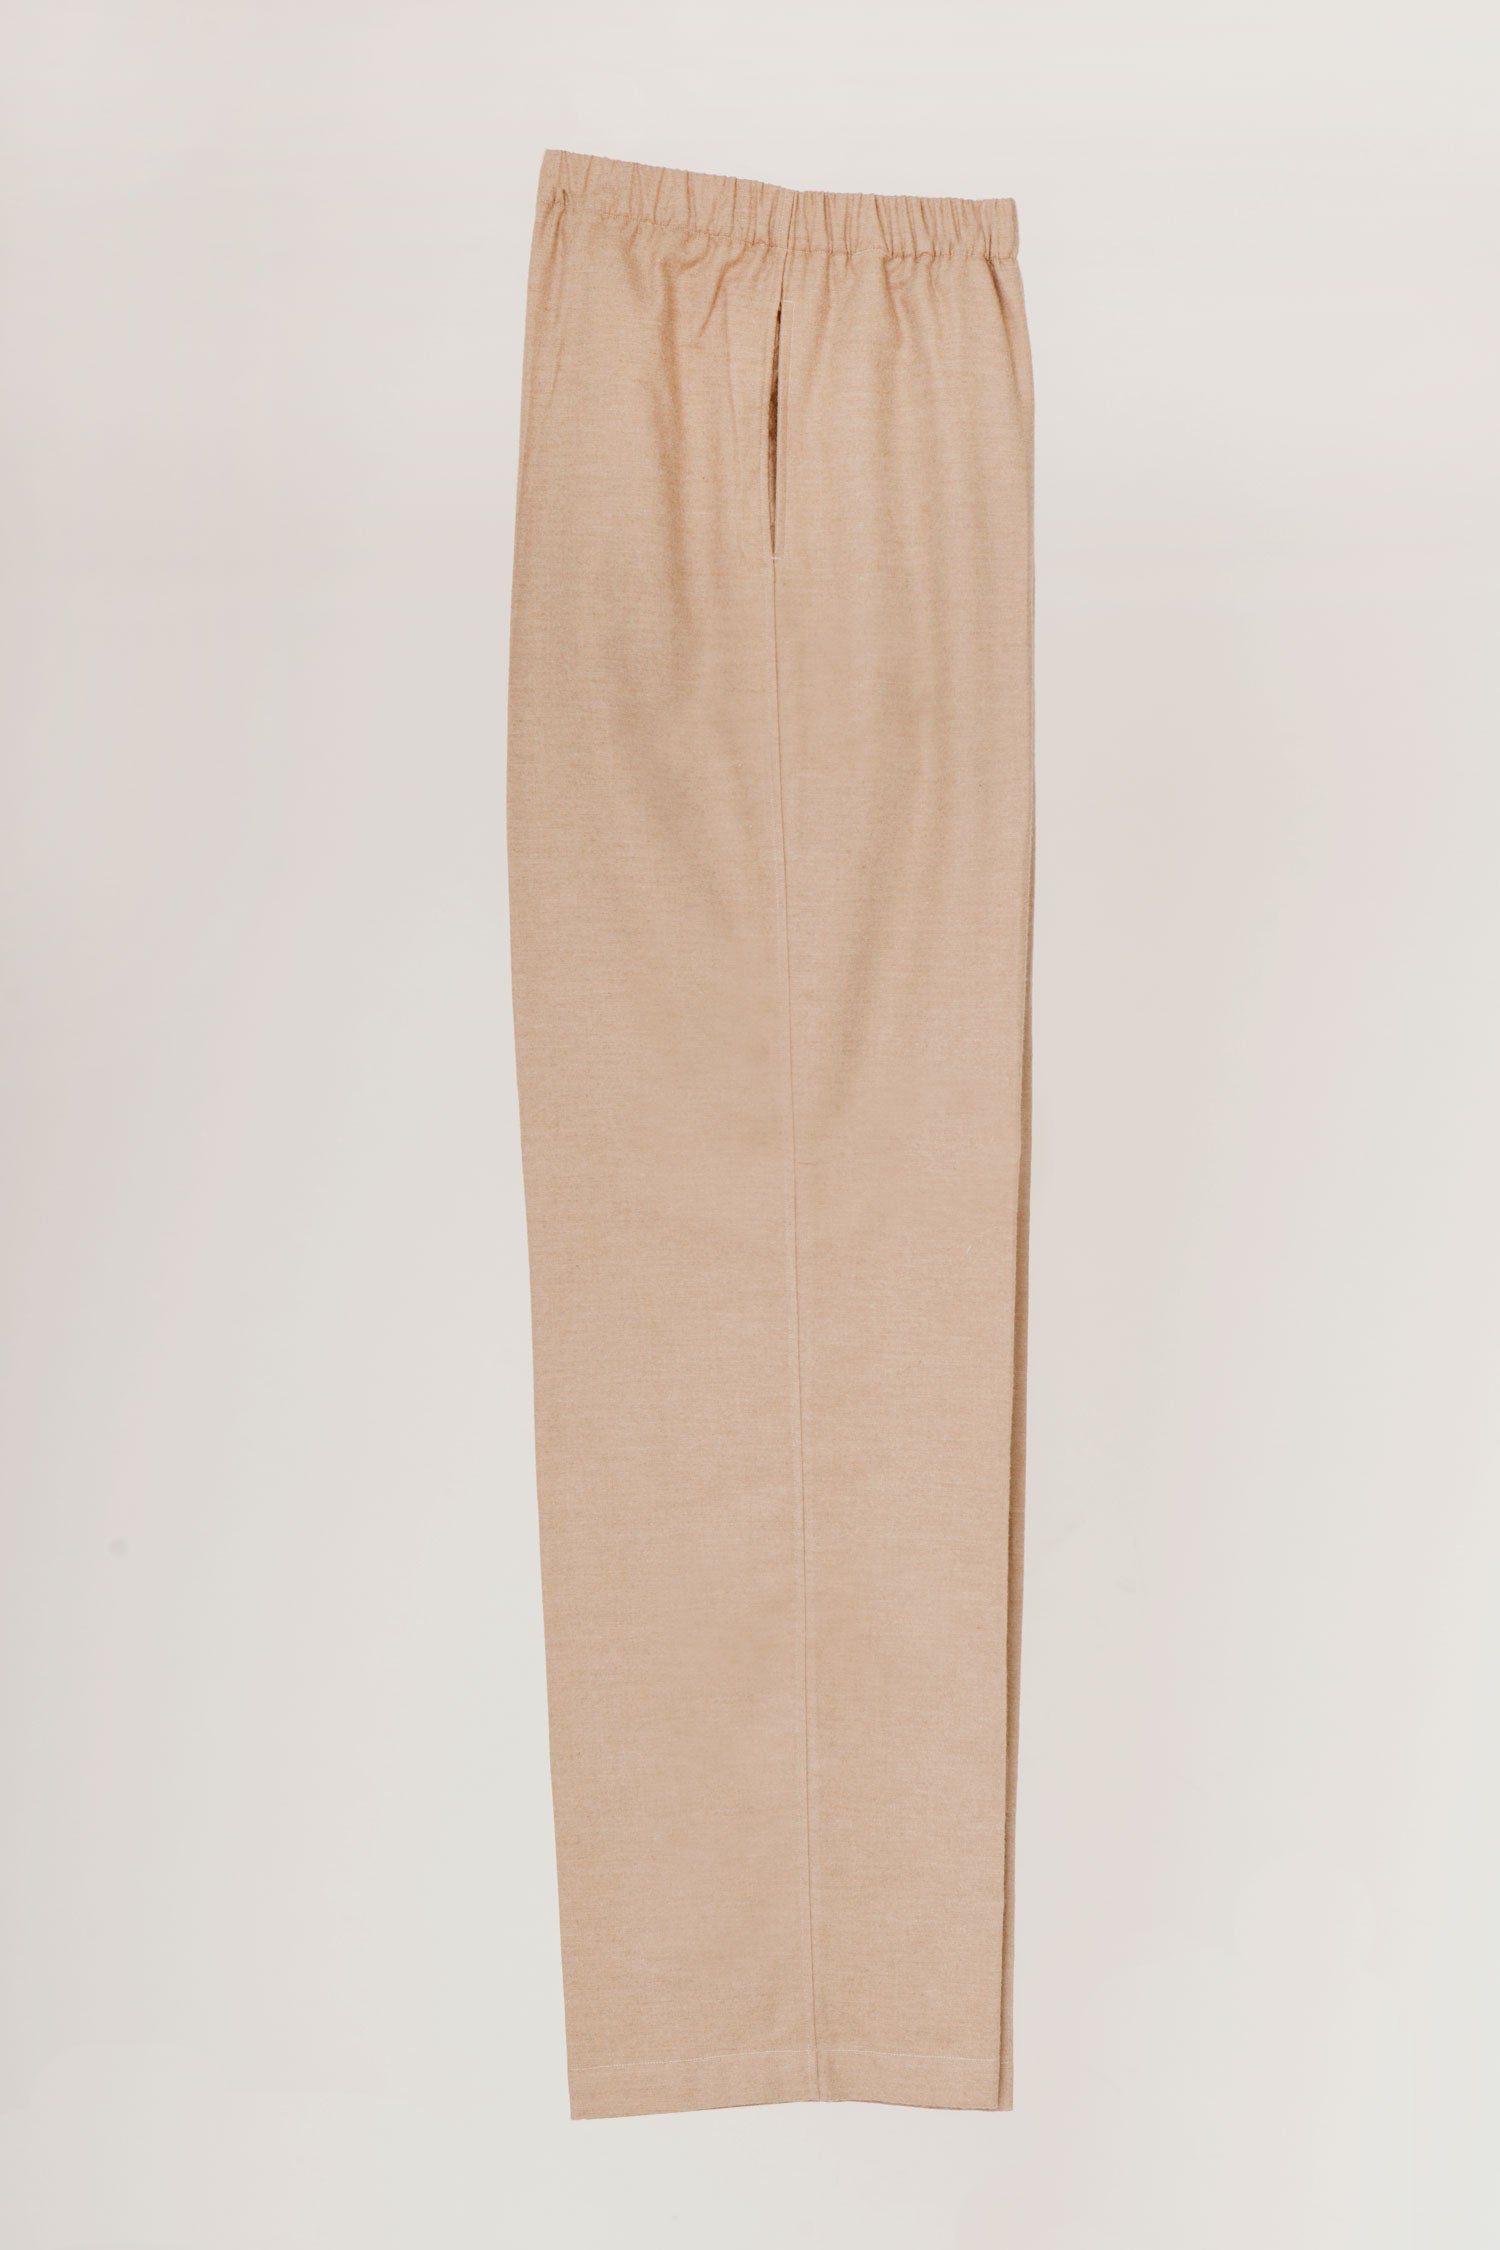 María trousers in cashmere and cotton